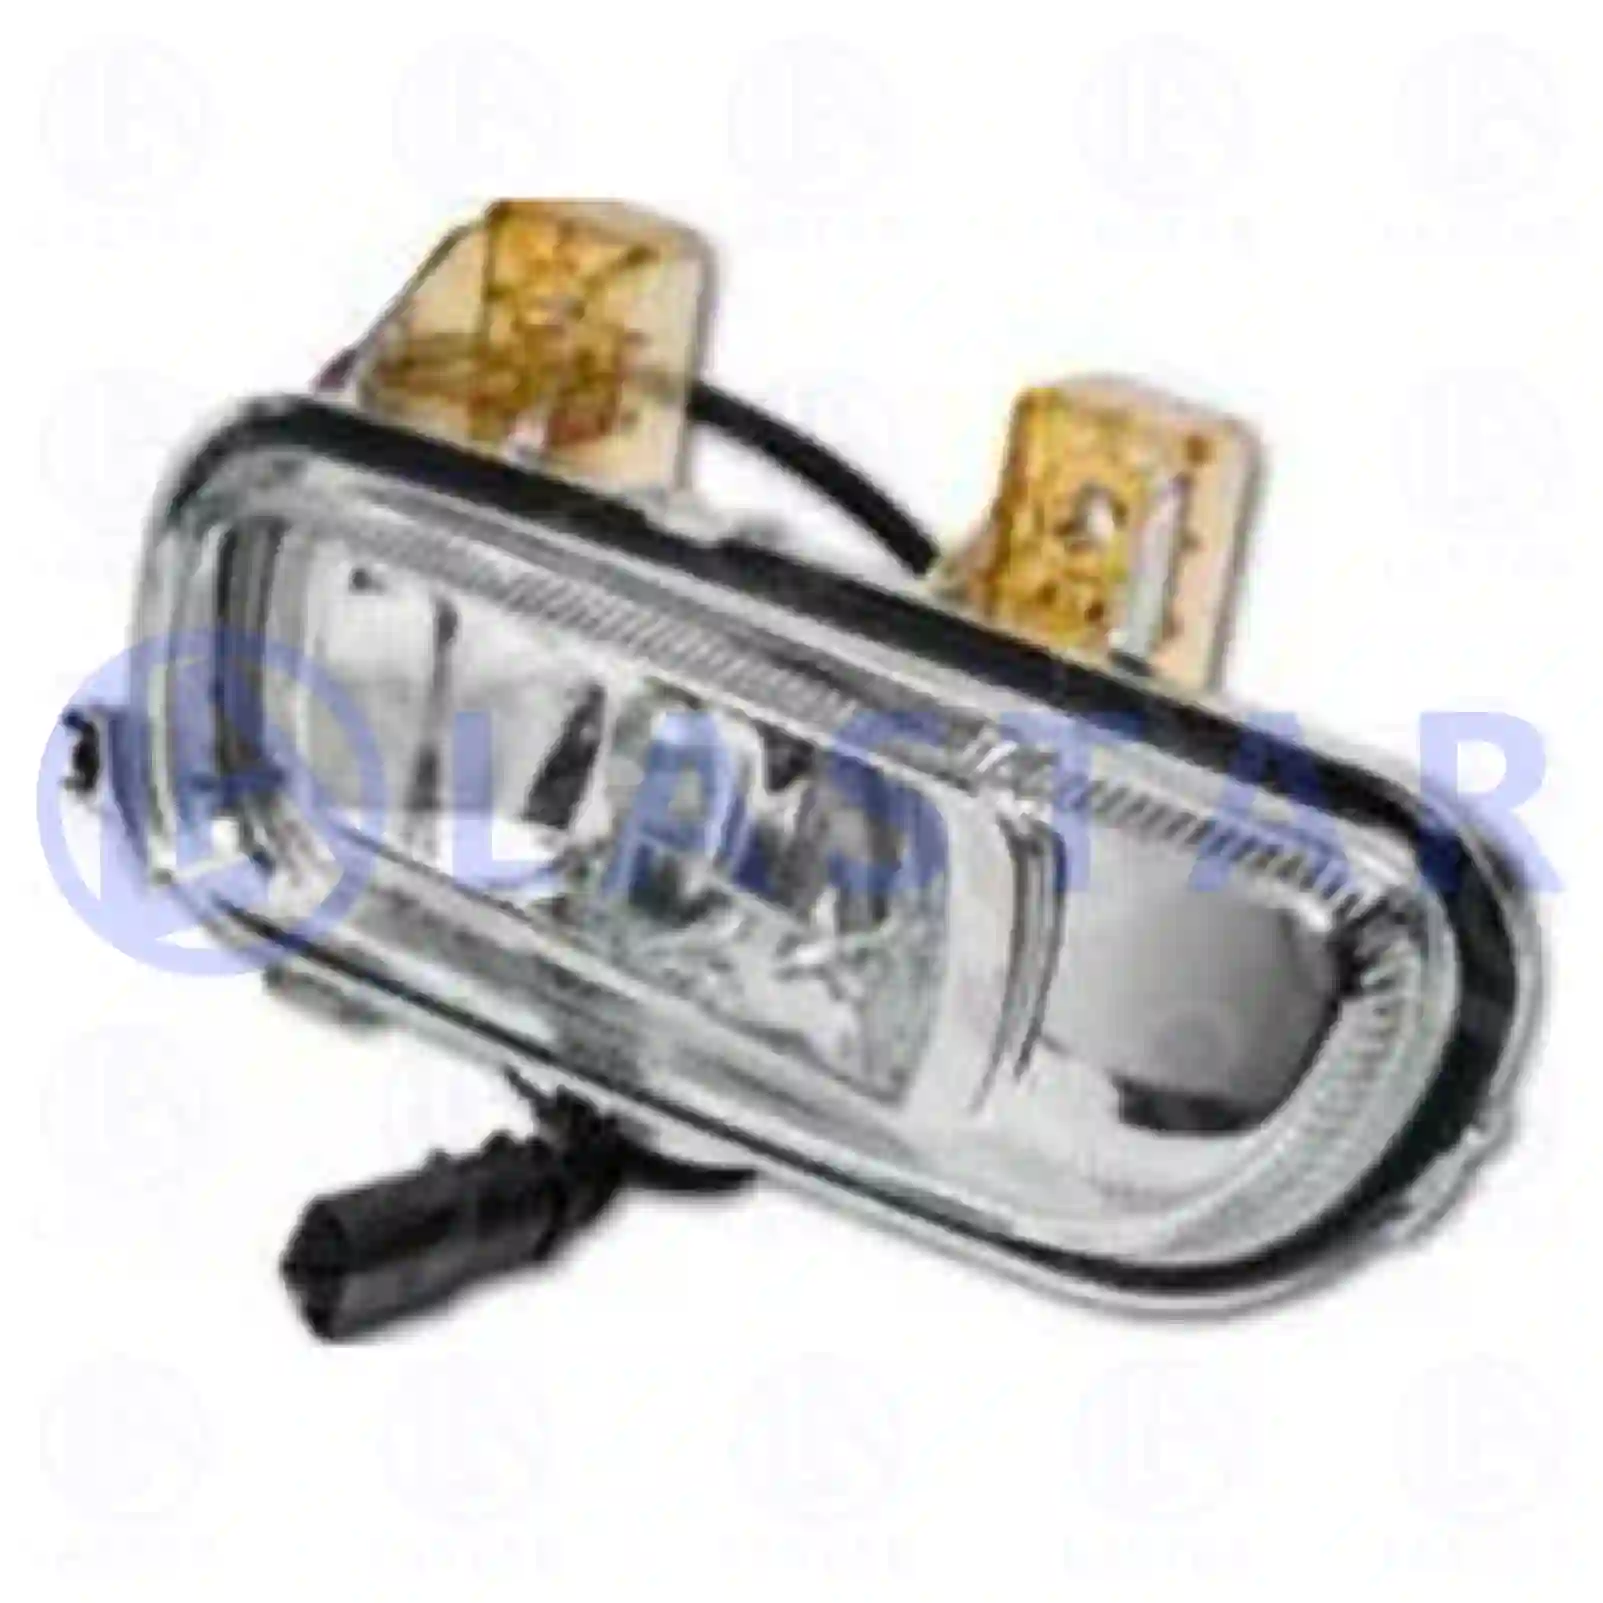 Fog lamp, right, with bulb, 77711833, 9408200156, ZG20426-0008, ||  77711833 Lastar Spare Part | Truck Spare Parts, Auotomotive Spare Parts Fog lamp, right, with bulb, 77711833, 9408200156, ZG20426-0008, ||  77711833 Lastar Spare Part | Truck Spare Parts, Auotomotive Spare Parts